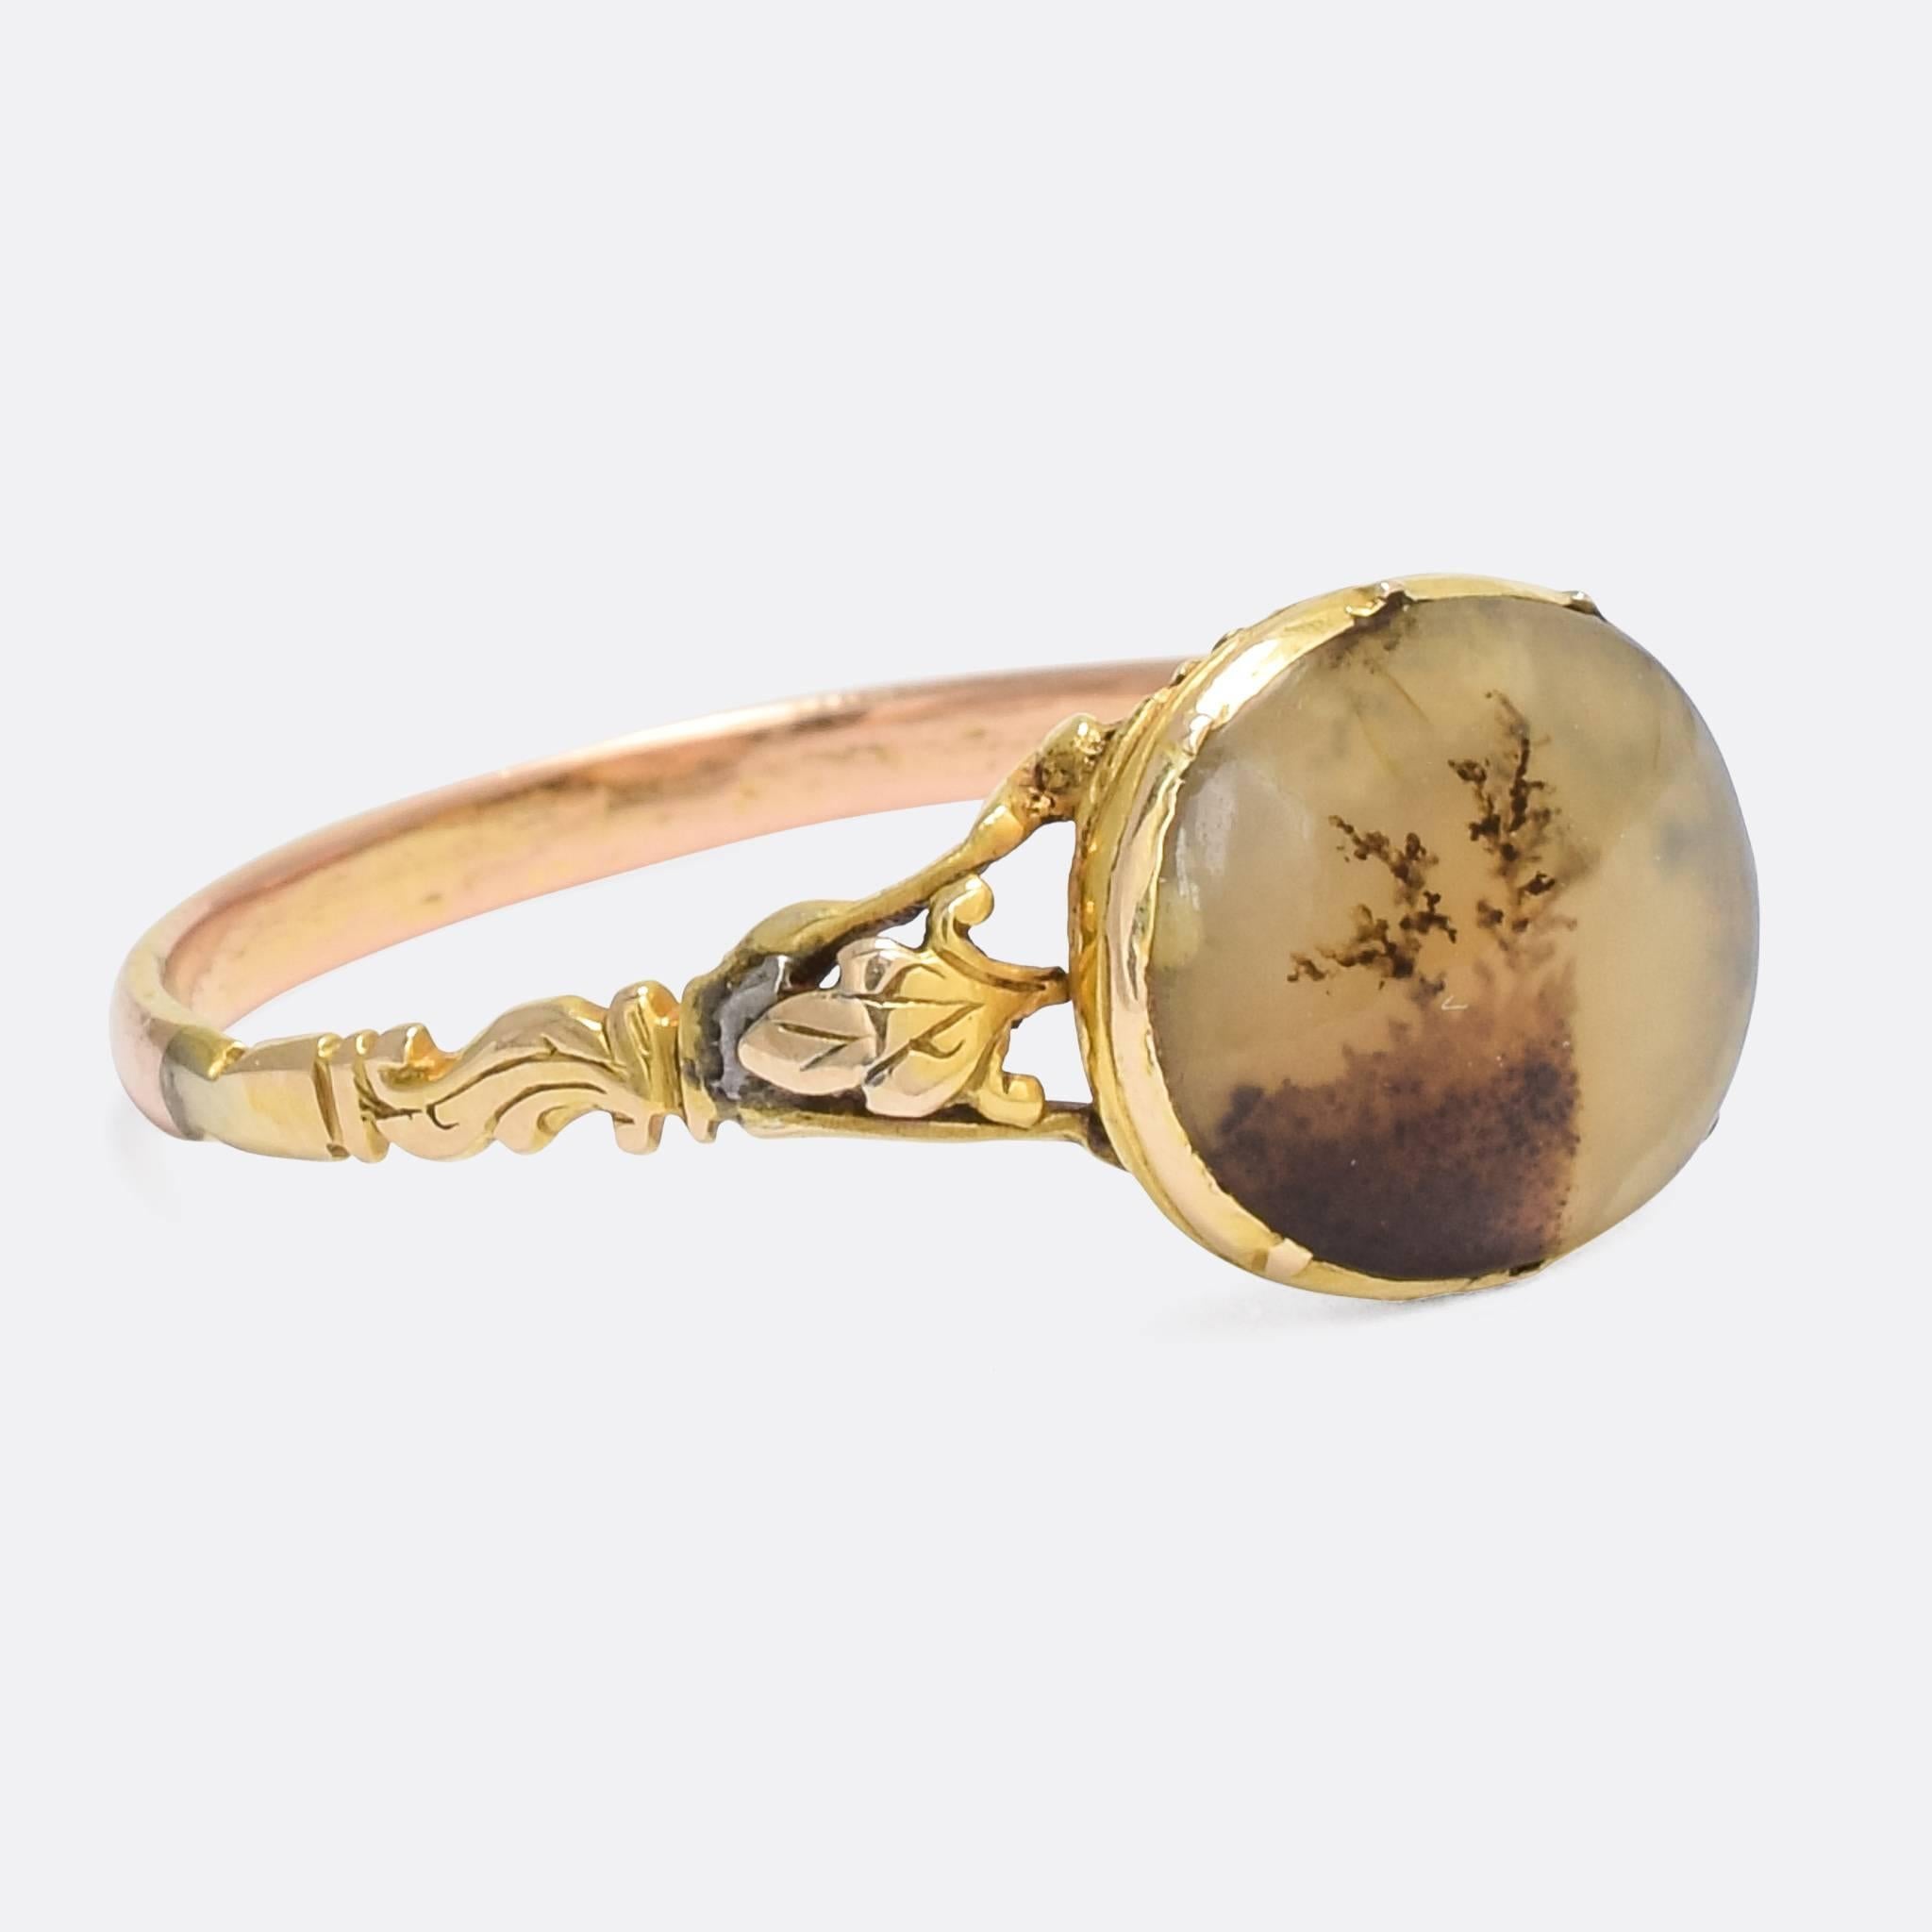 A beautiful antique ring, the head set with a dendritic agate landscape stone in a closed back setting. Very typical of the early 19th Century, the split shoulders have an applied leaf design, and the back of the head is fluted. A fine example of